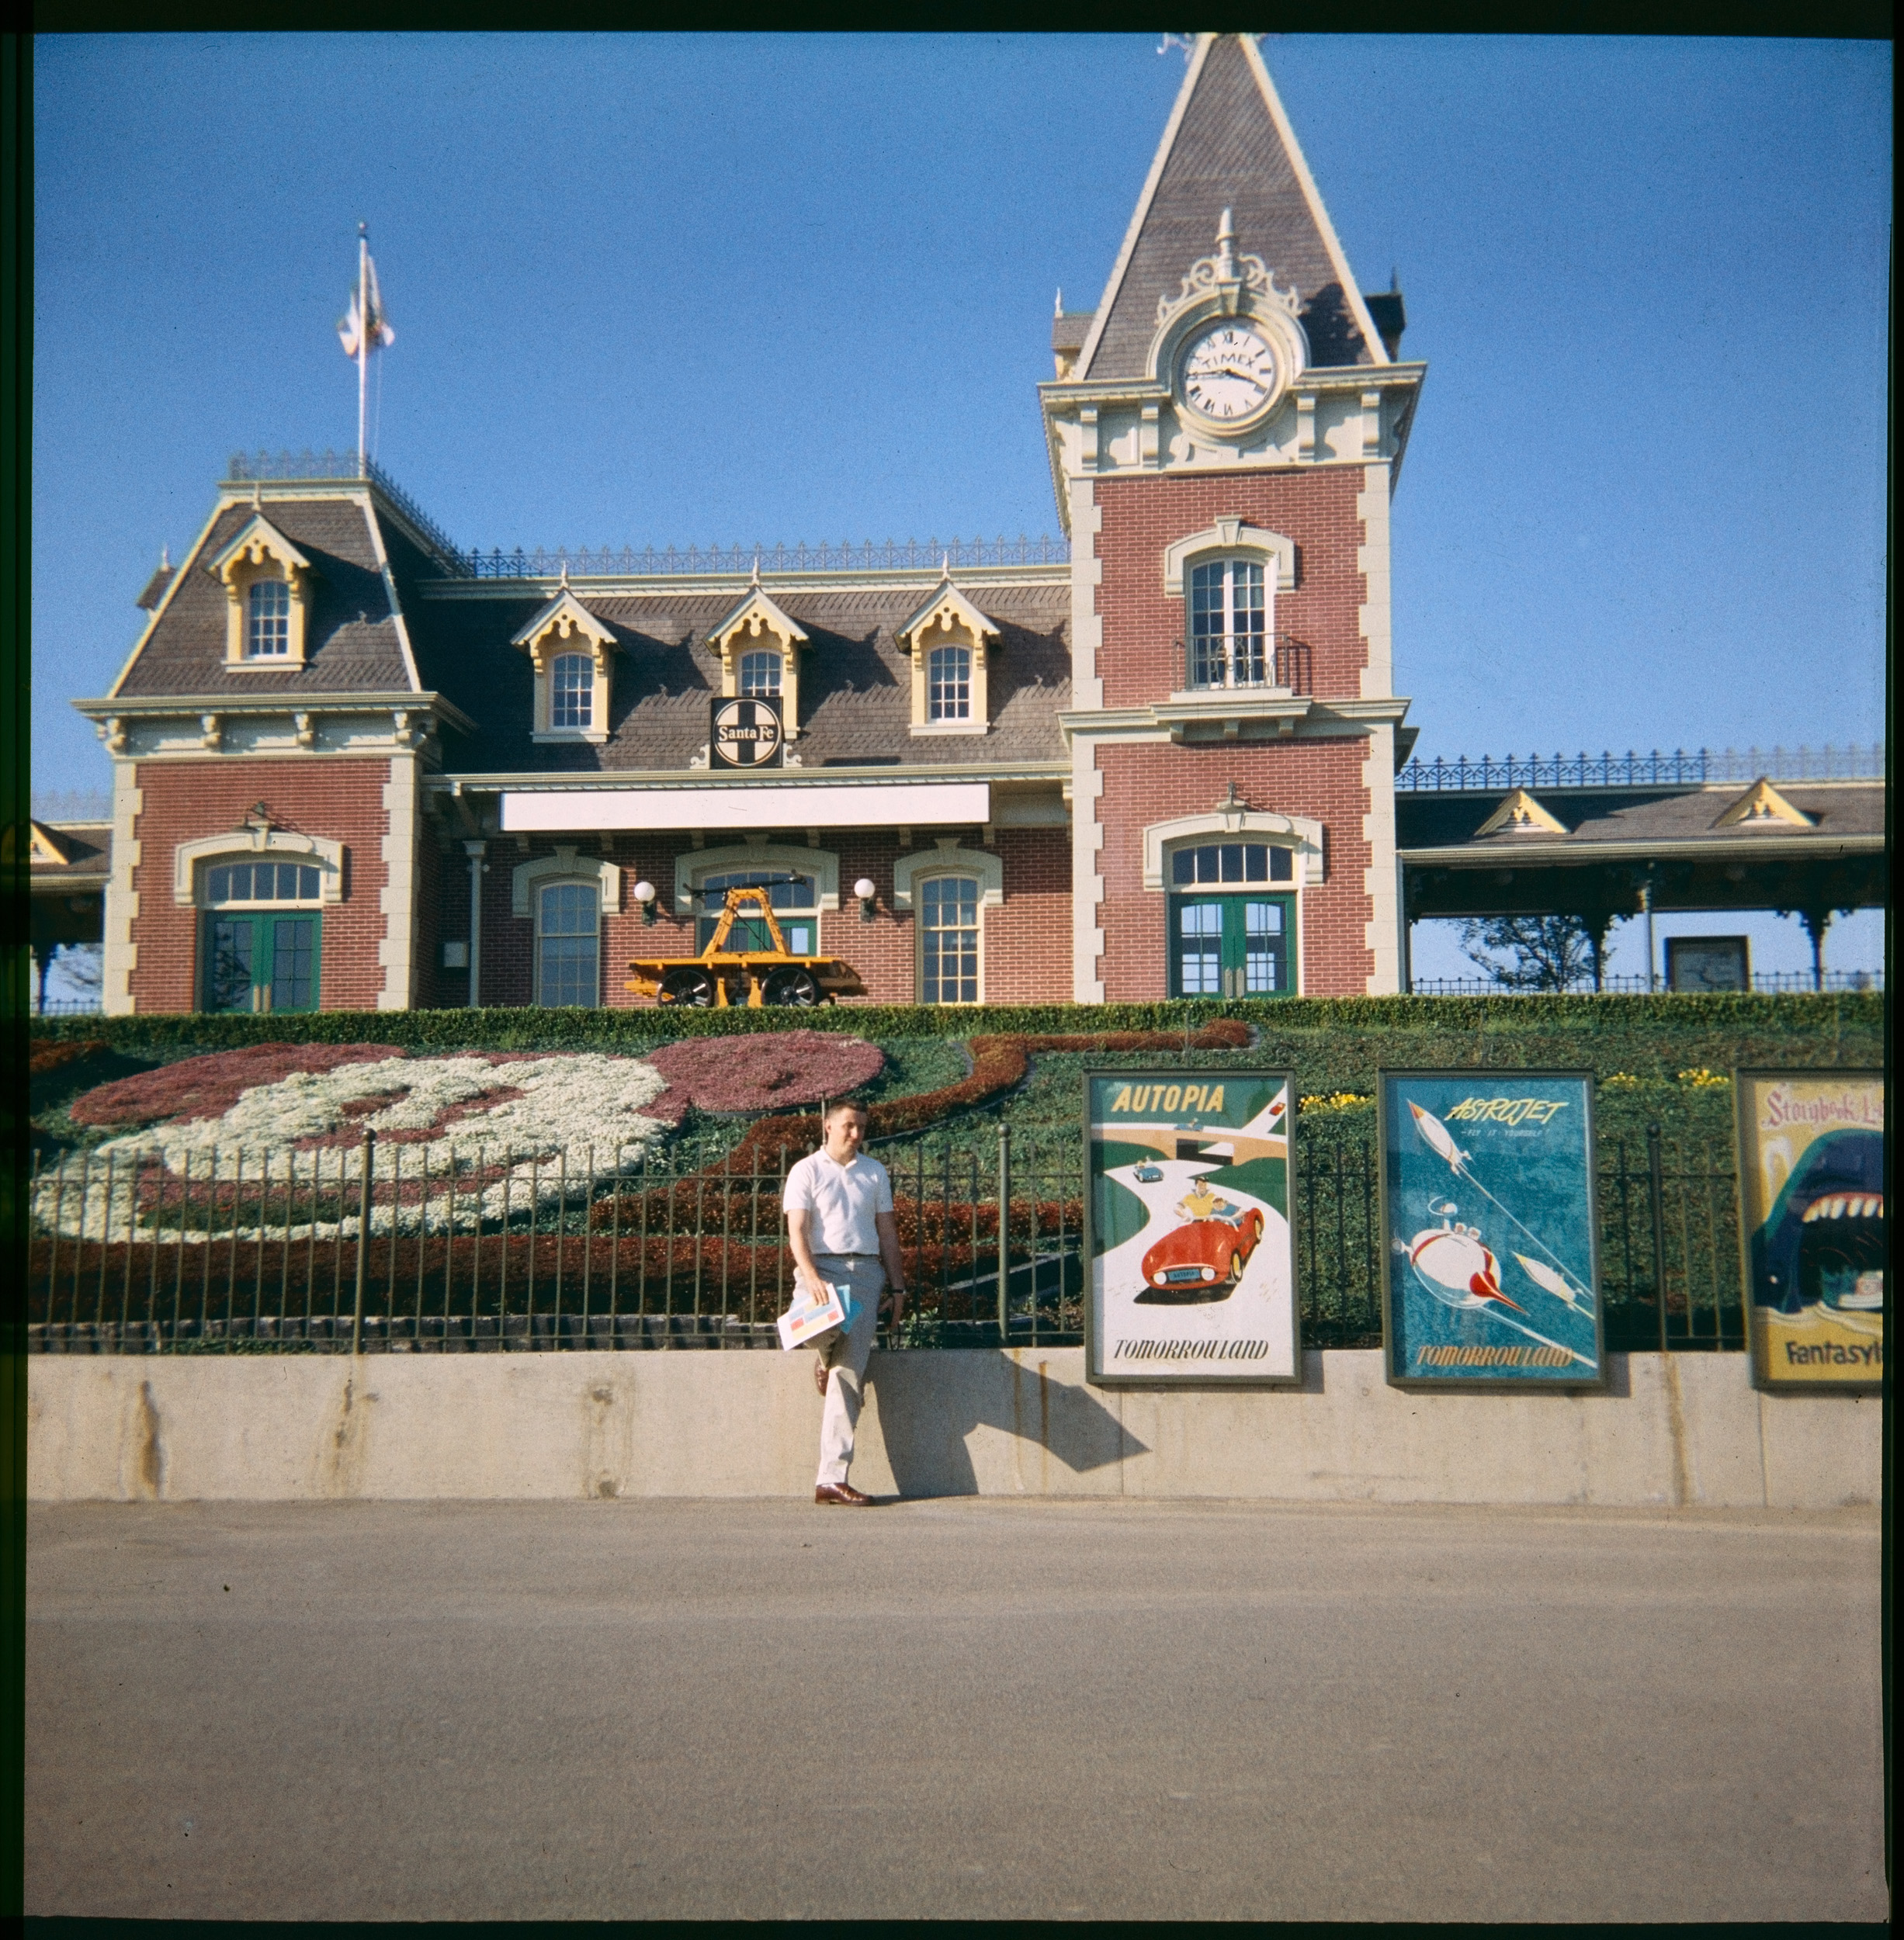 Since July 17 is Disneyland's 60th Anniversary, and since Shorpy has recently scored a trove of medium-format color transparencies, I thought I'd post this one my sister took with her Kodak Duaflex at the Magic Kingdom on her honeymoon in February 1958. Why the sign on the train station is blank, I don't know, since at all other times it's read "DISNEYLAND" with the elevation and "population." Also... where is everybody? View full size.